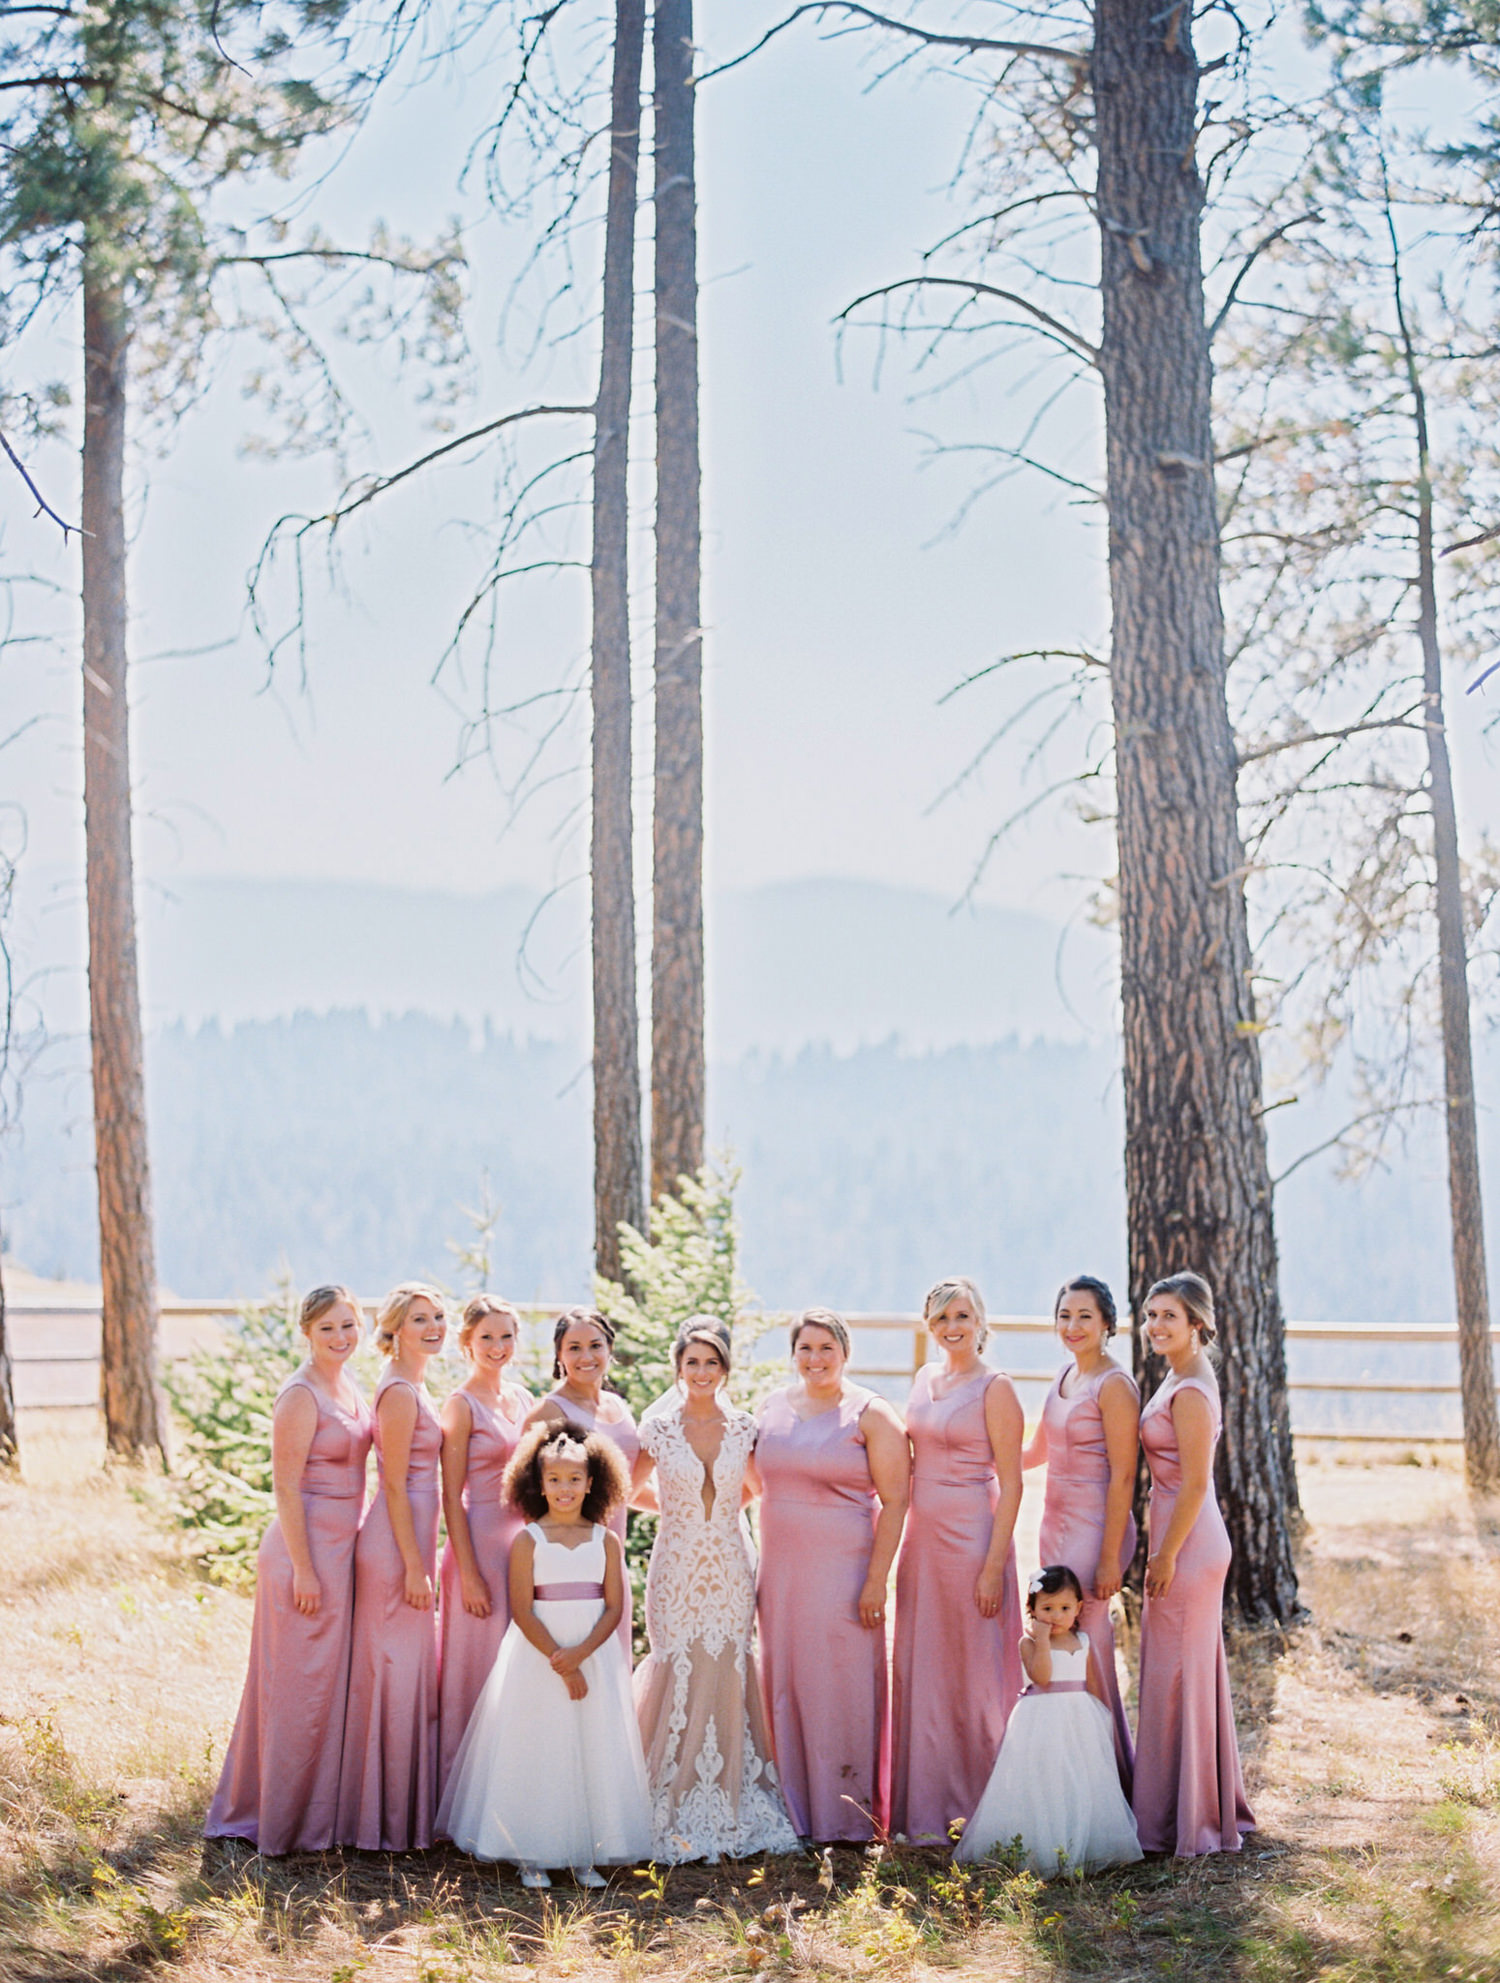 260-bright-coral-wedding-with-sinclair-and-moore-at-suncadia-resort.jpg